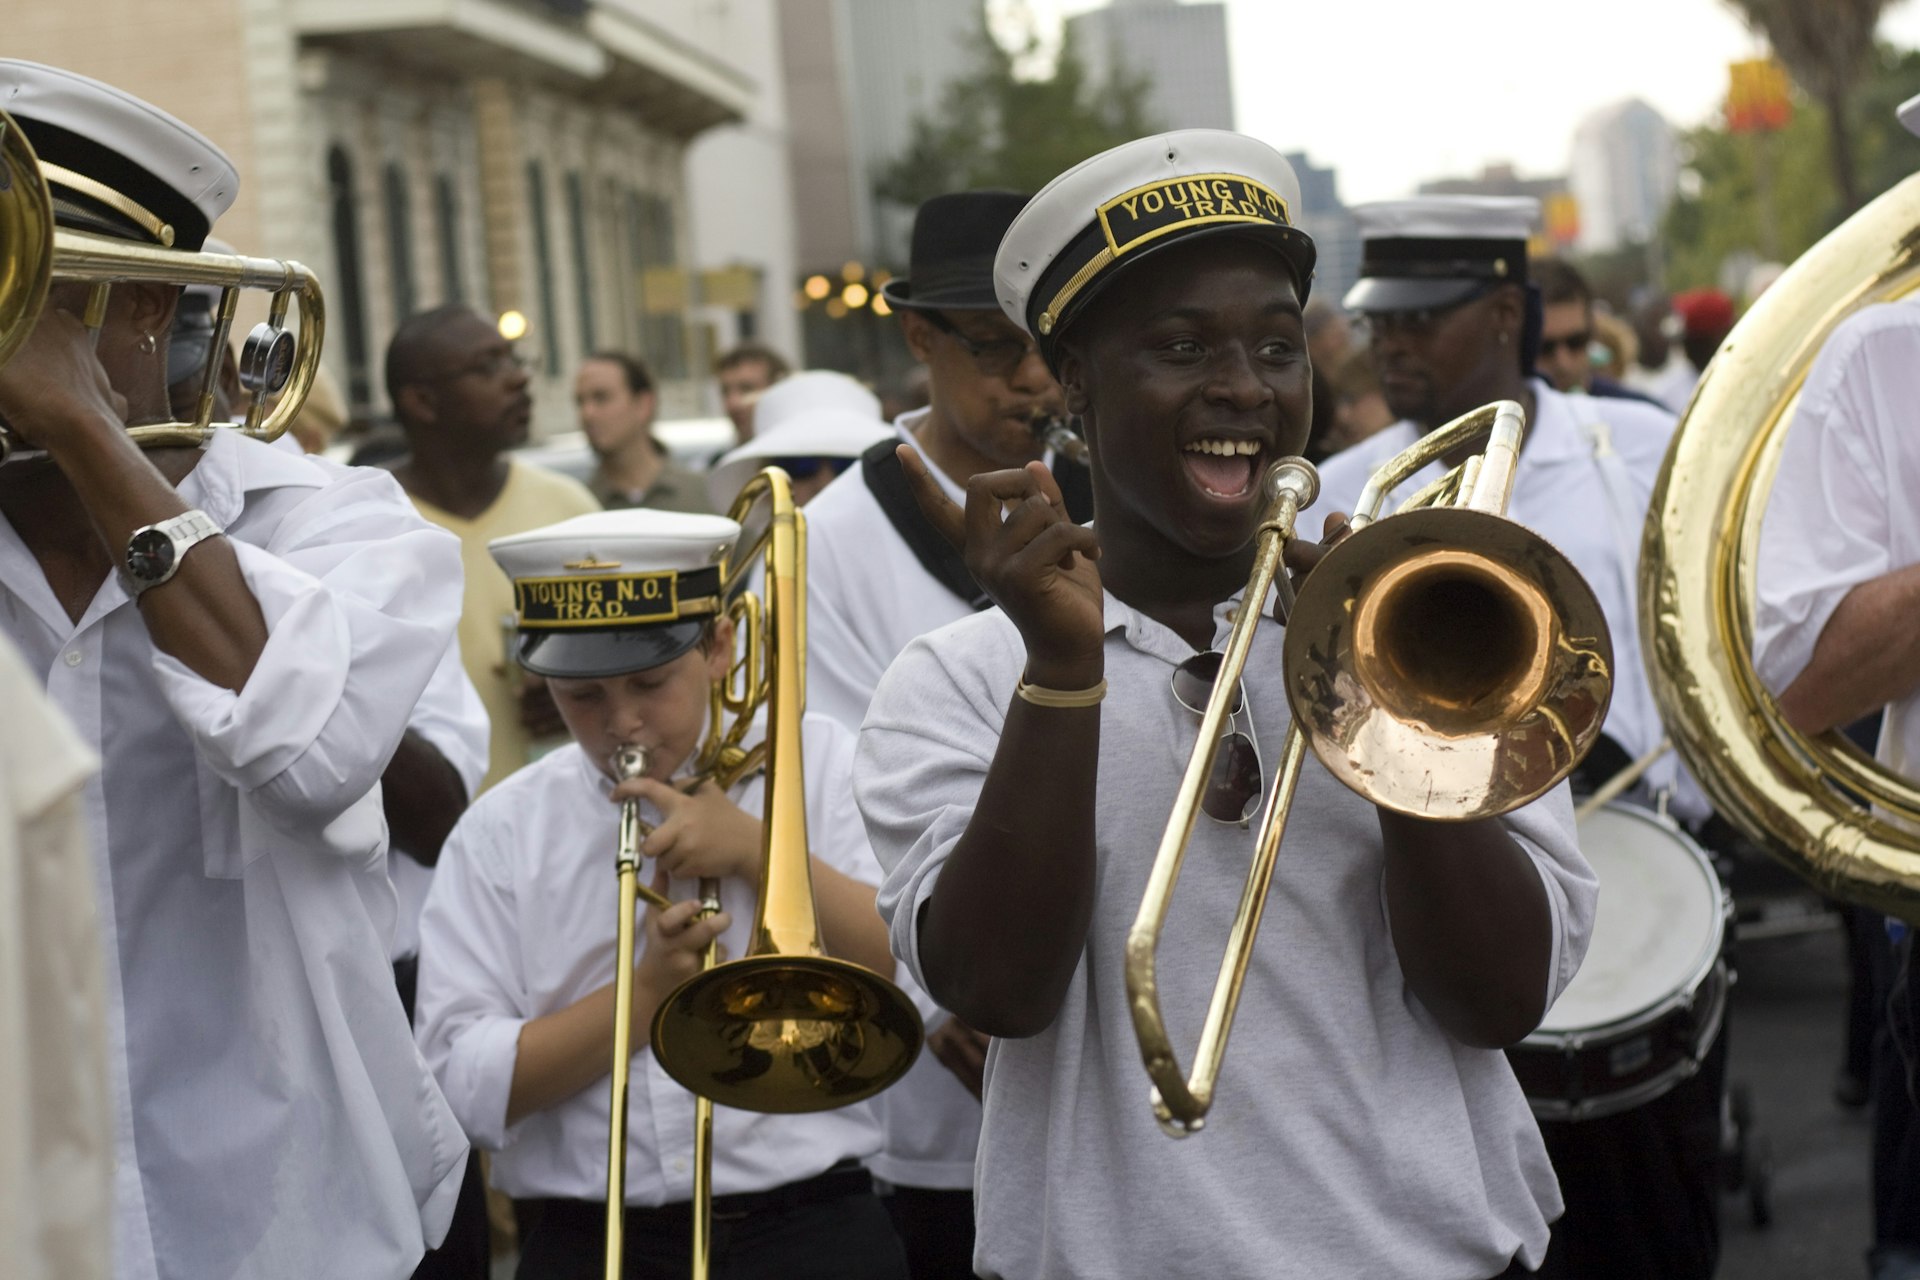 Black Men of Labor parade with Young New Orleans Traditional Brass Band performing.